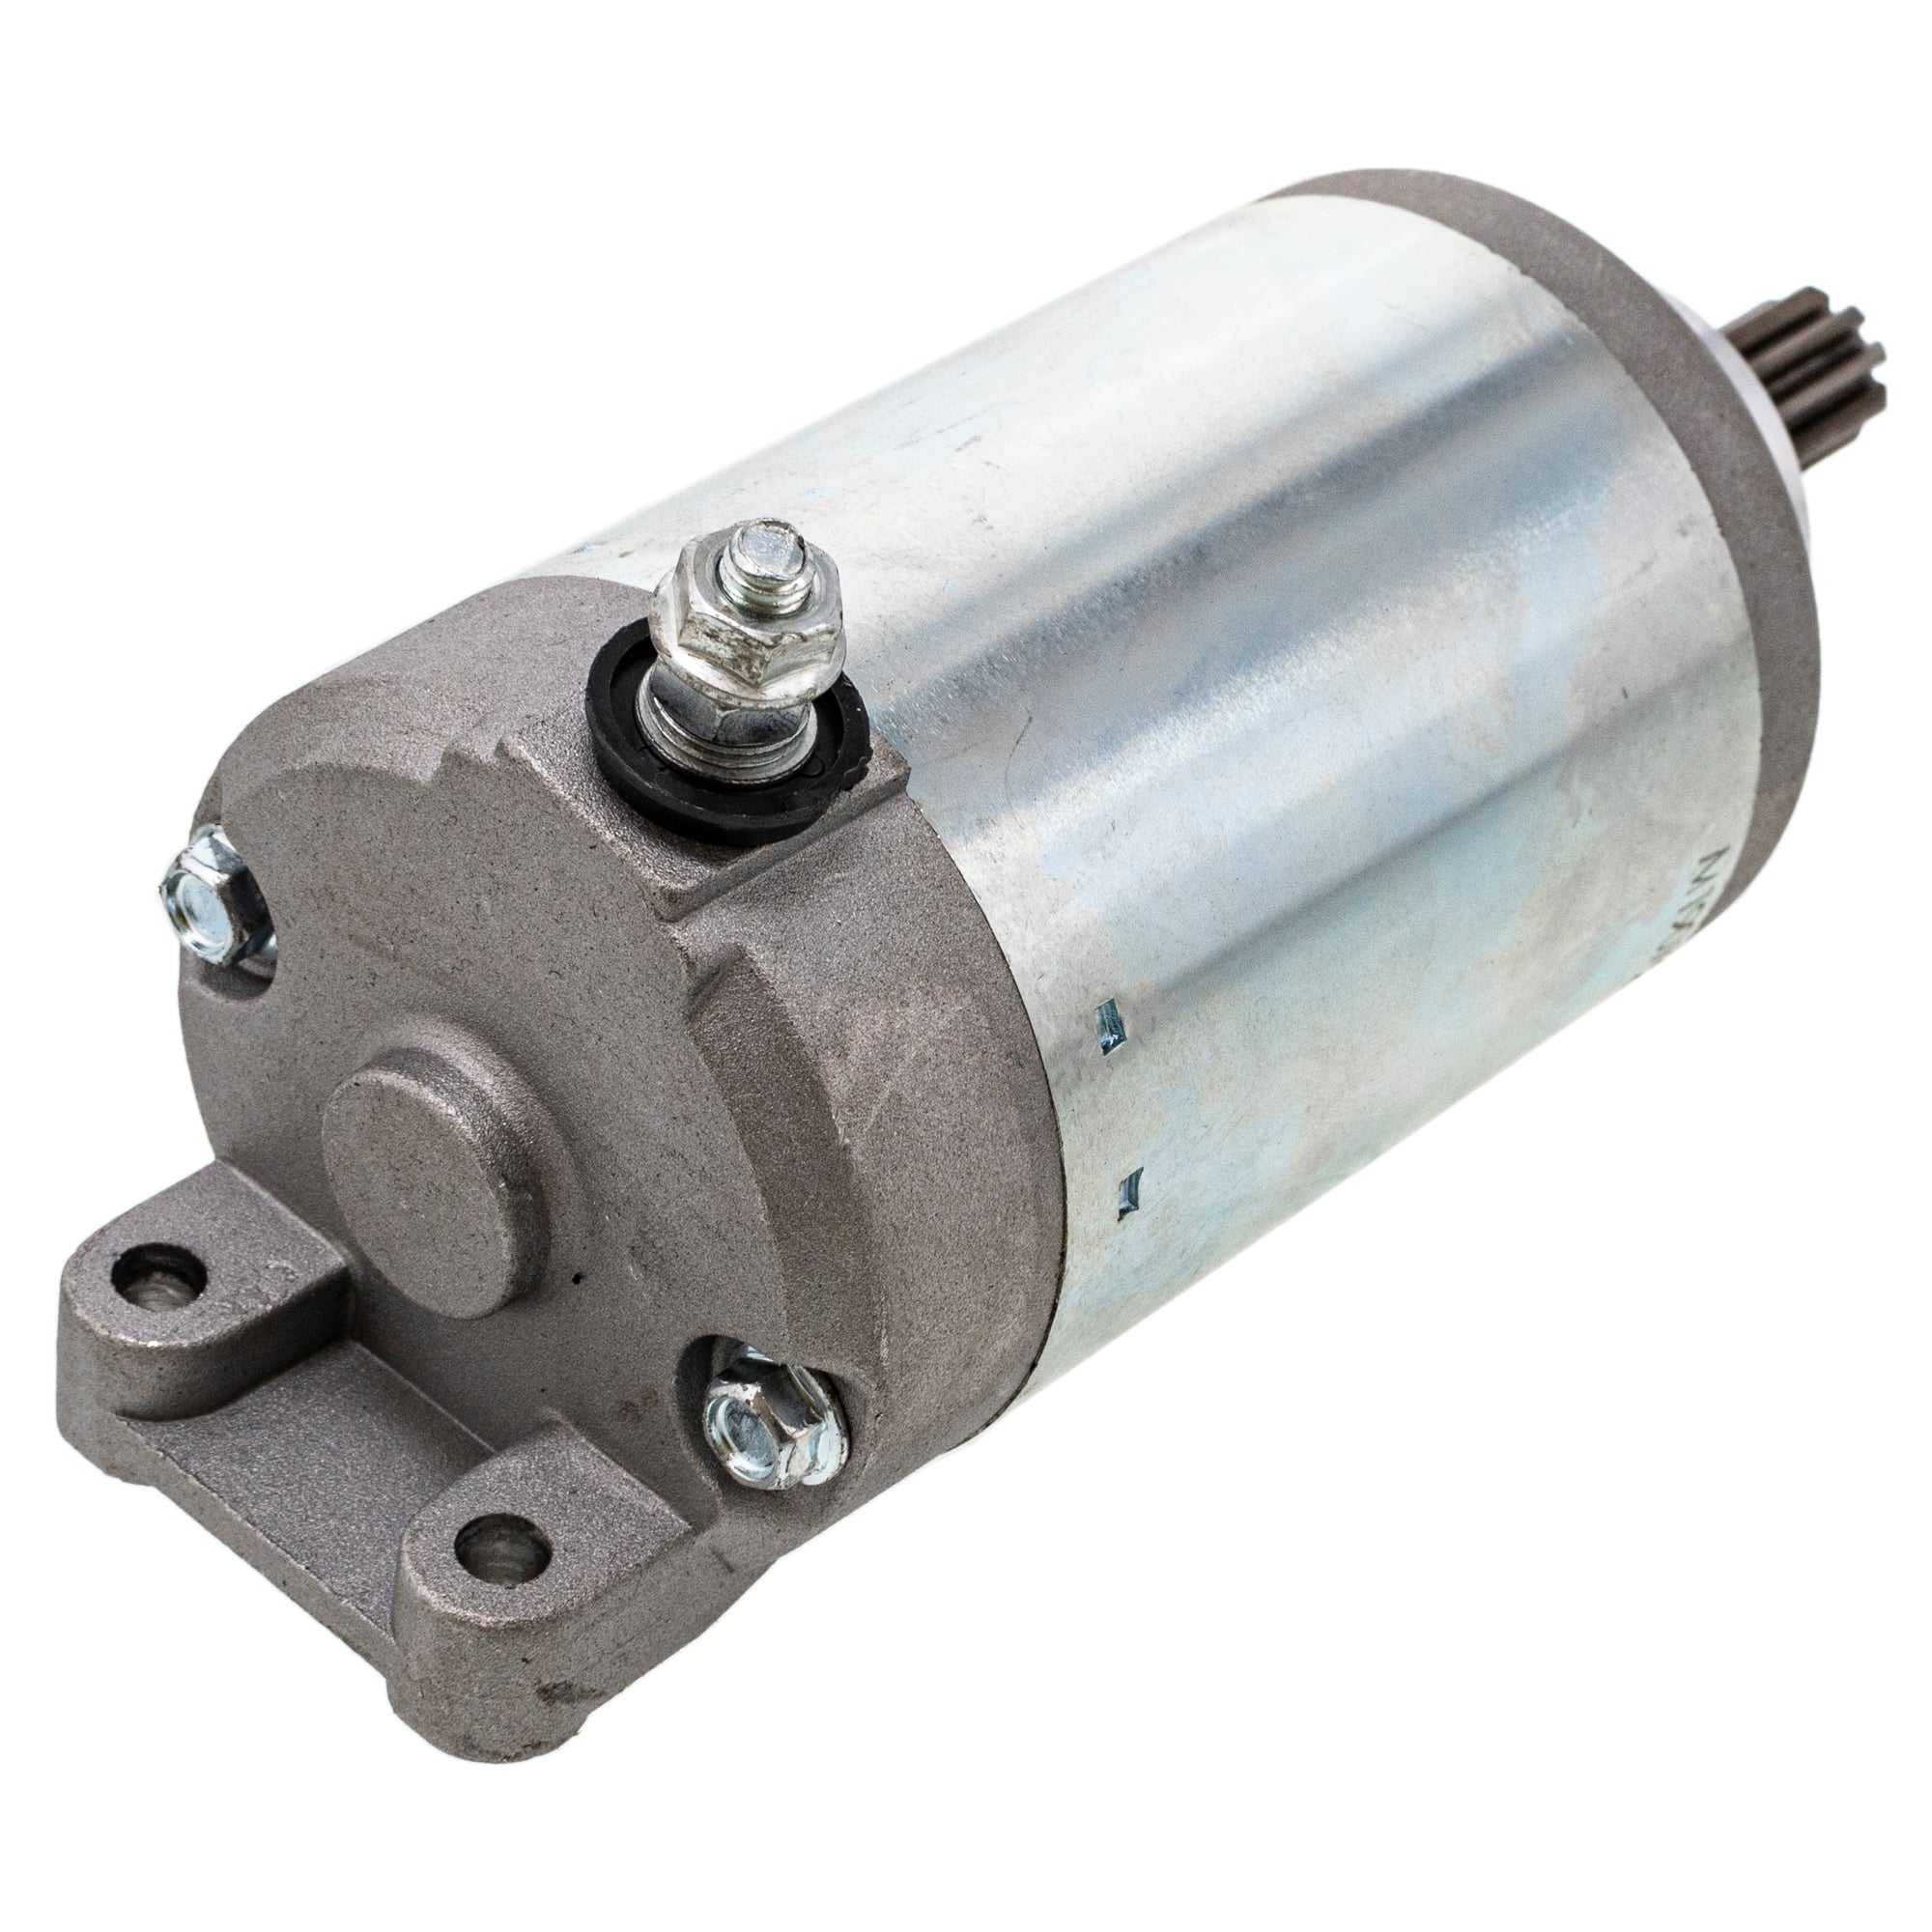 Starter Motor Assembly 519-CSM2266O For Arctic Cat 0825-024 0825-014 0825-013 0825-012 0825-011